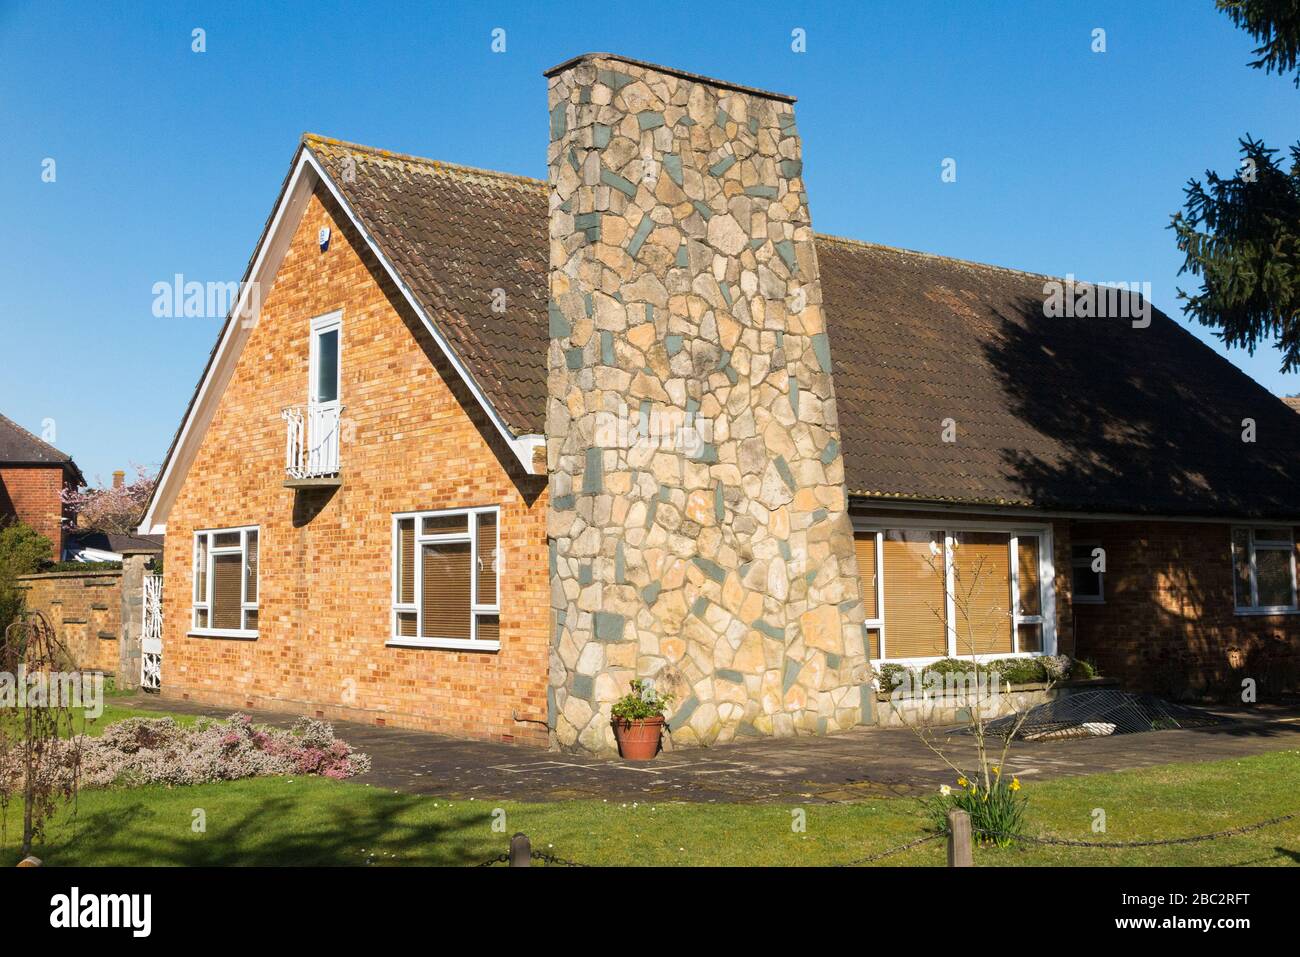 Chalet style brick bungalow with 1960s or 1970s architecture and a large pronounced feature chimney made from stone. Surrey, UK. (116) Stock Photo